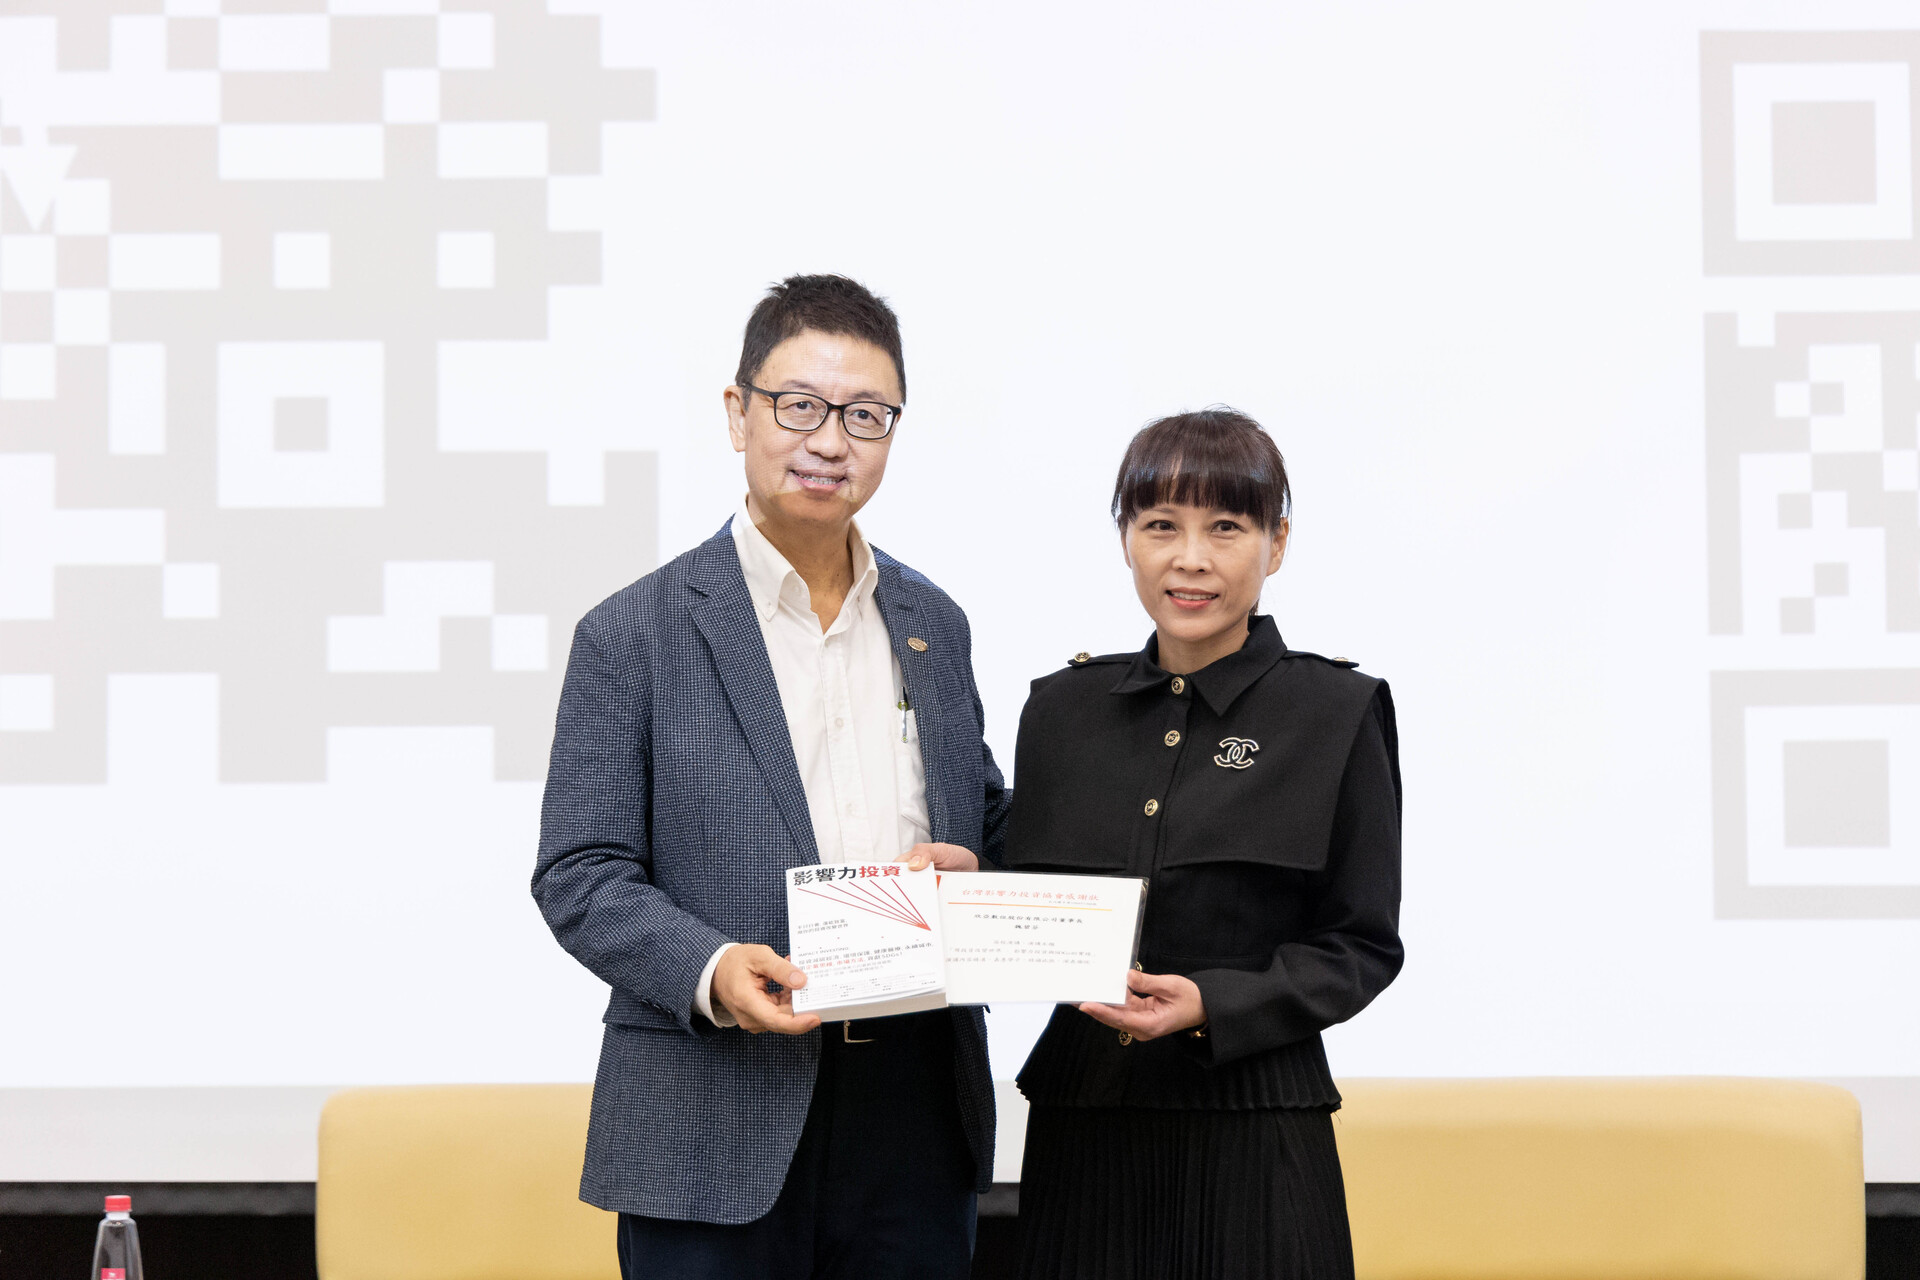 CEO of Taiwan Impact Investing Association Tao-kuei Wu awards a certificate of appreciation and presents a book to Chairman of Sinya Digital Co. Pi-fen Wei